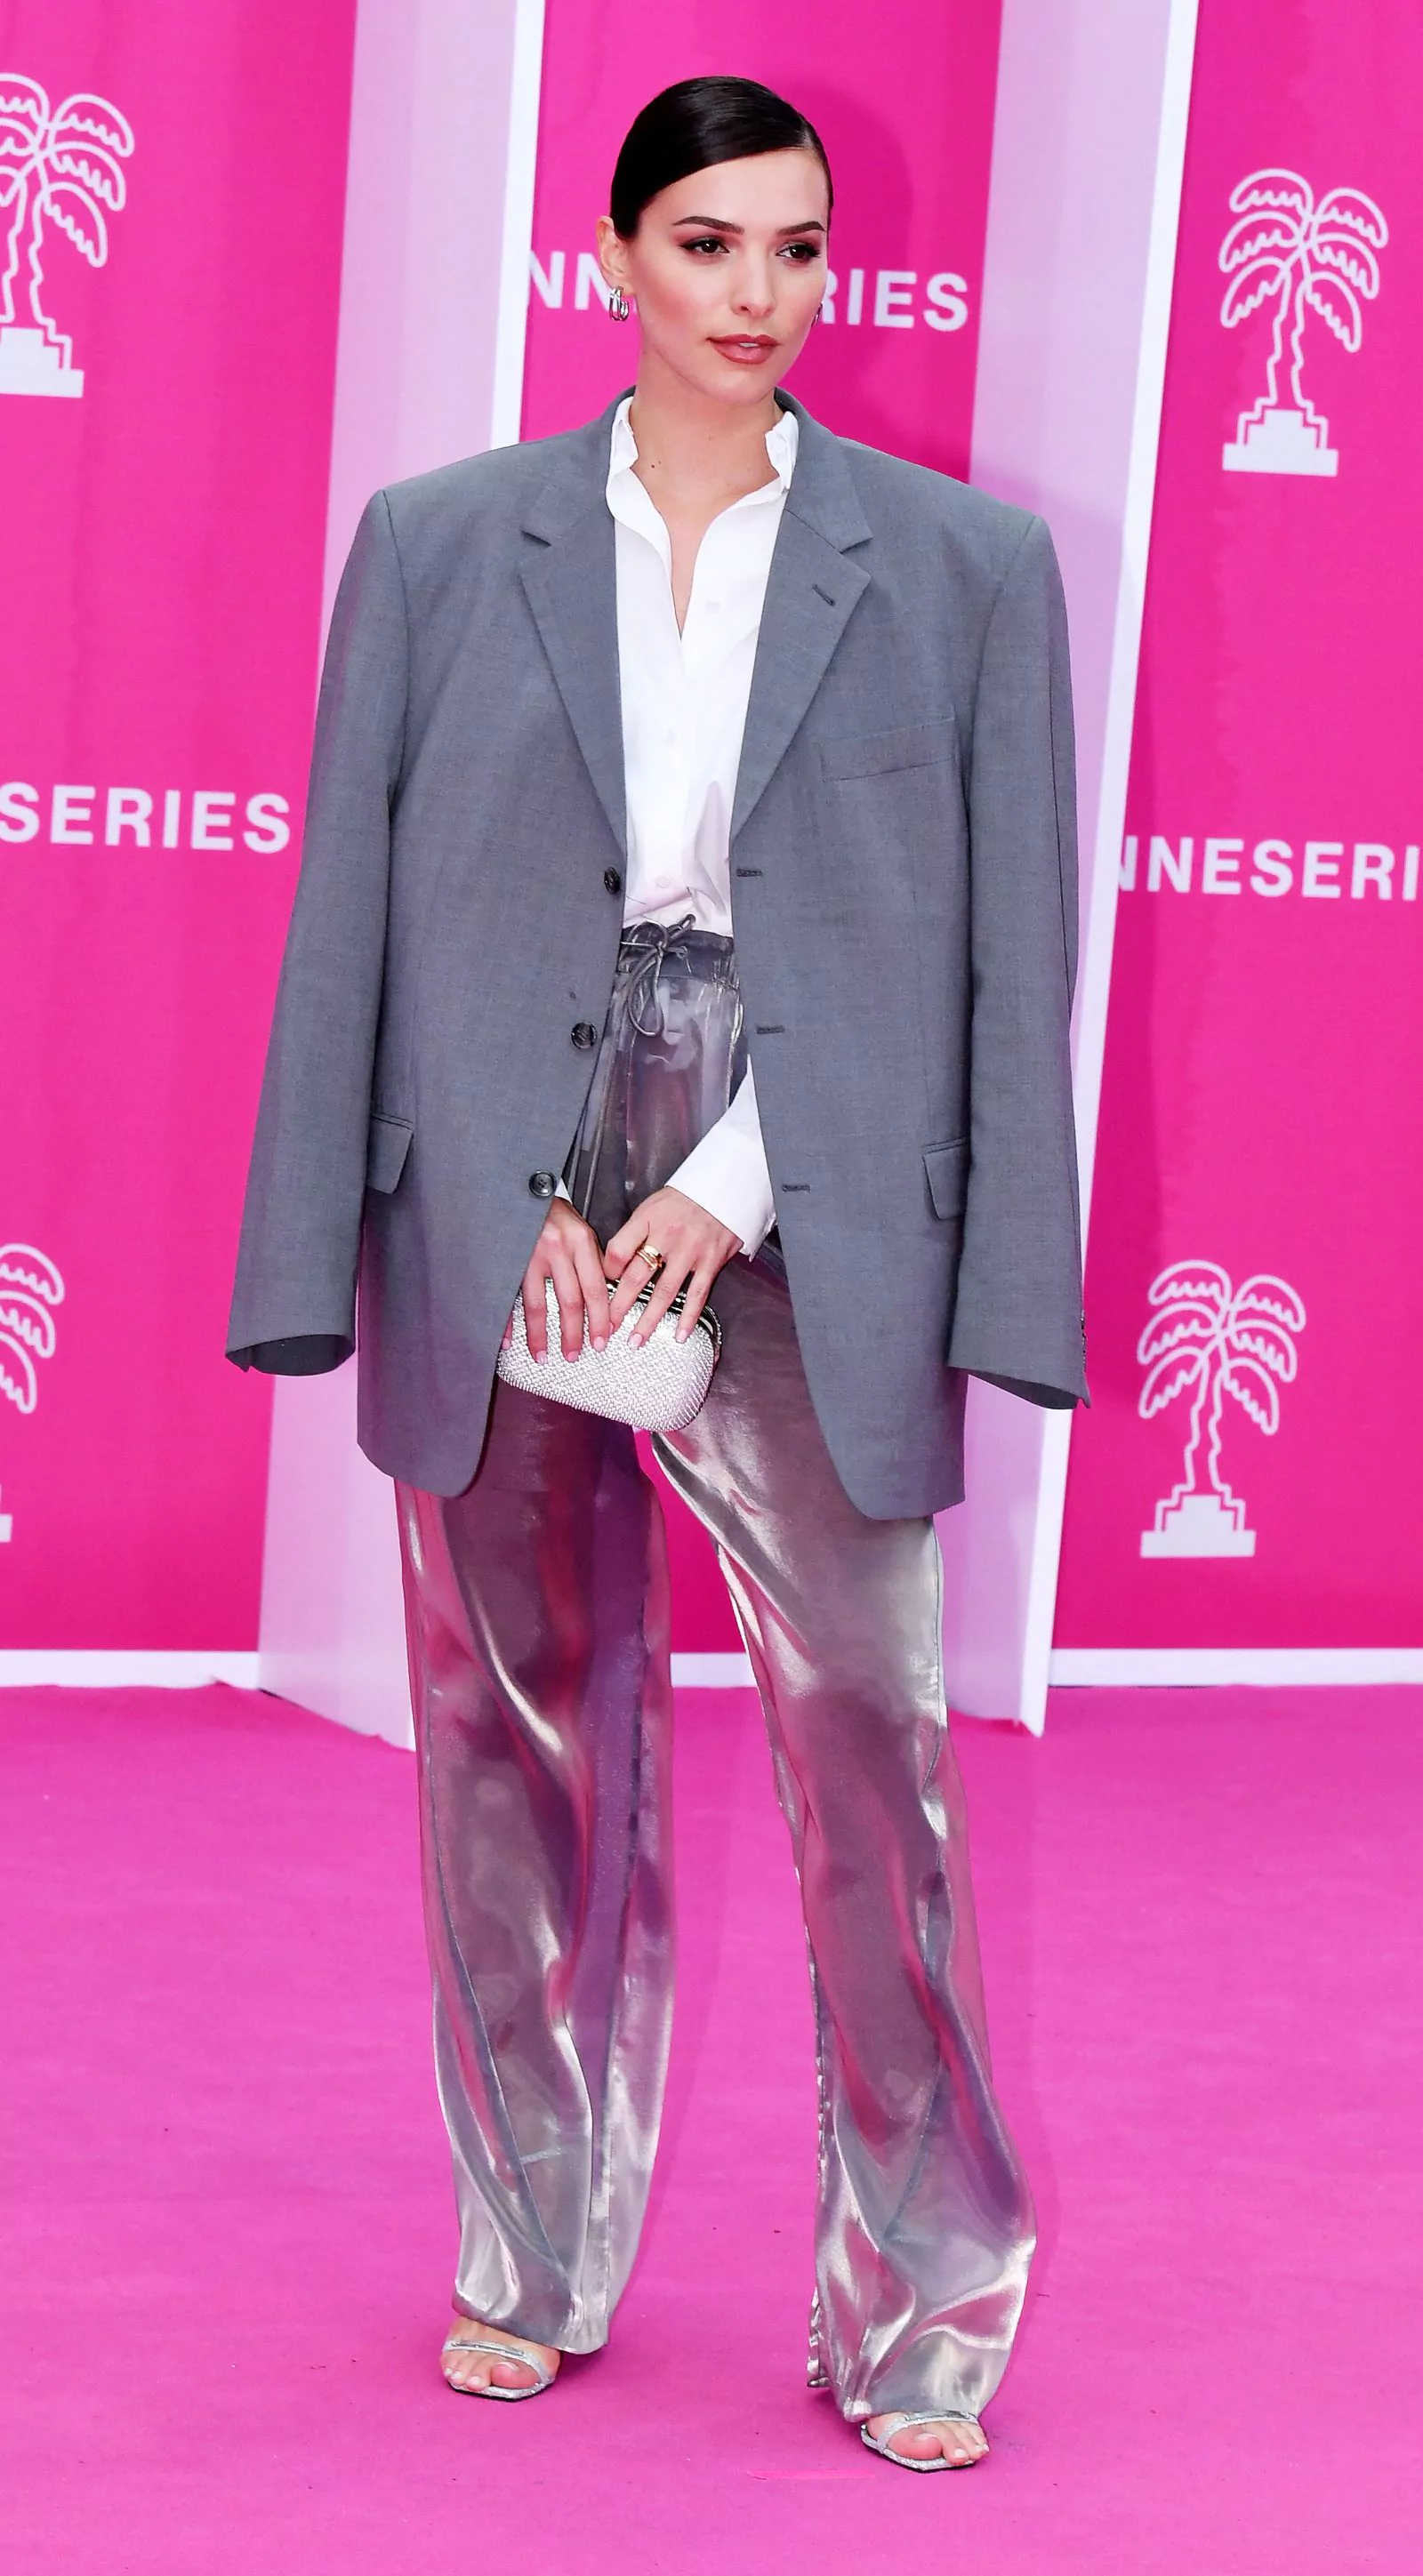 Kleofina Pnishi at the 6th International Festival of TV Series Canneseries 2023 in Cannes, April 14, 2023